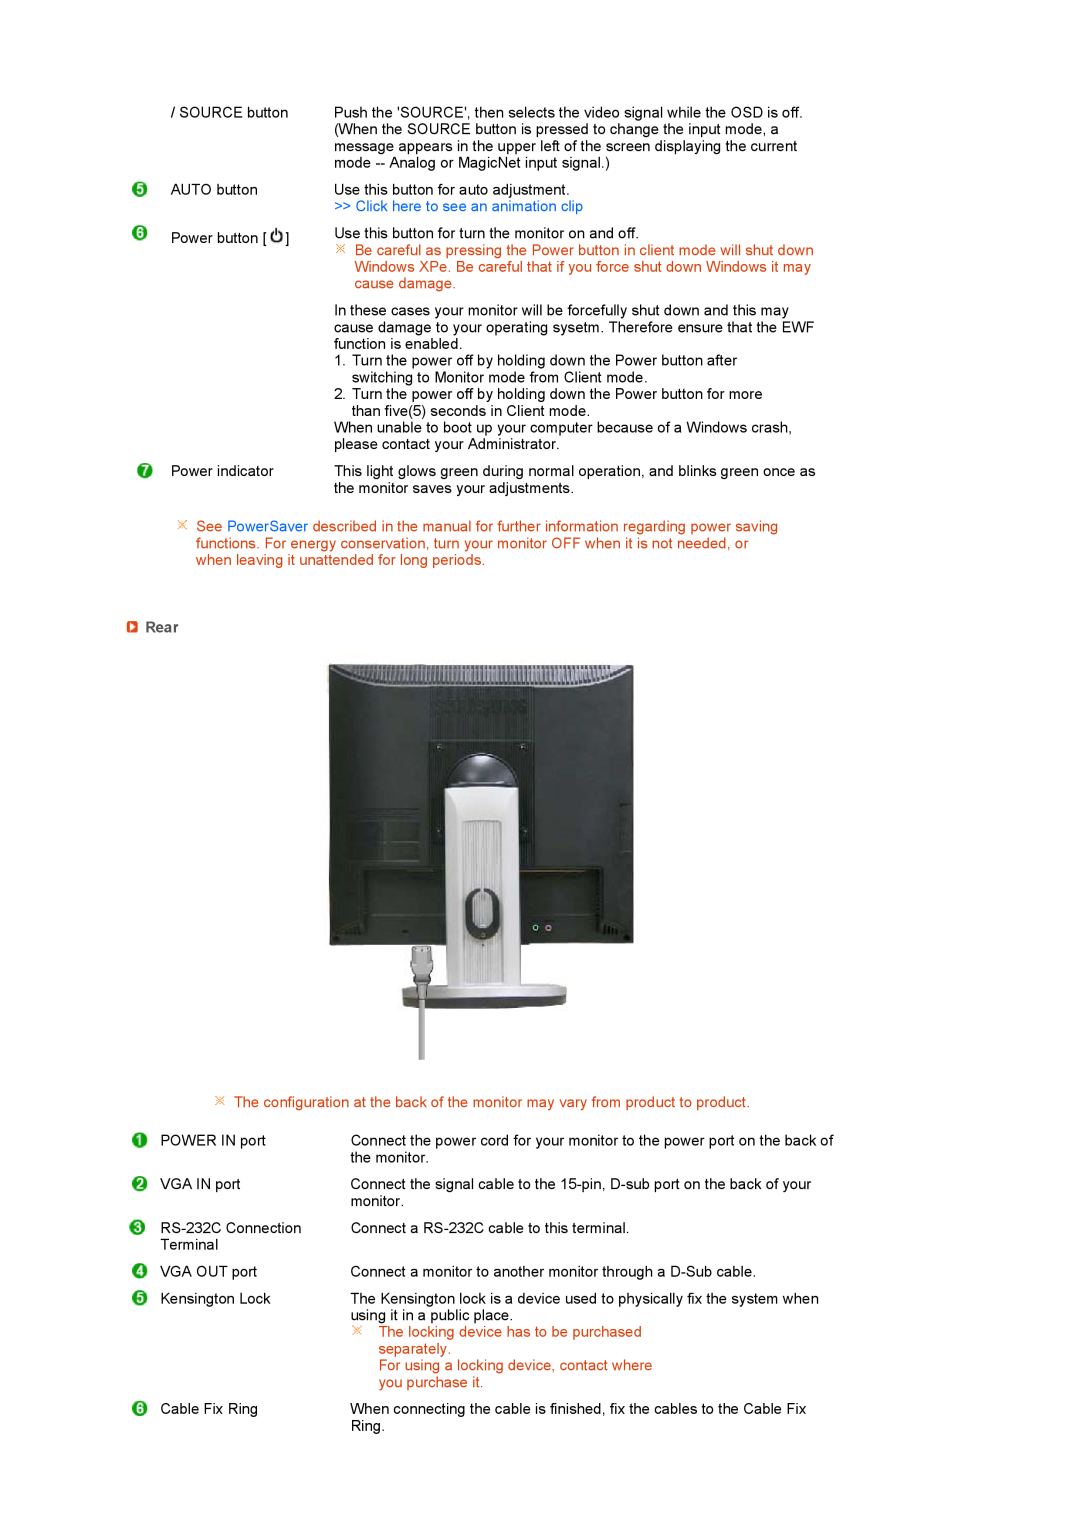 Samsung 920XT manual Rear, The locking device has to be purchased, separately, For using a locking device, contact where 